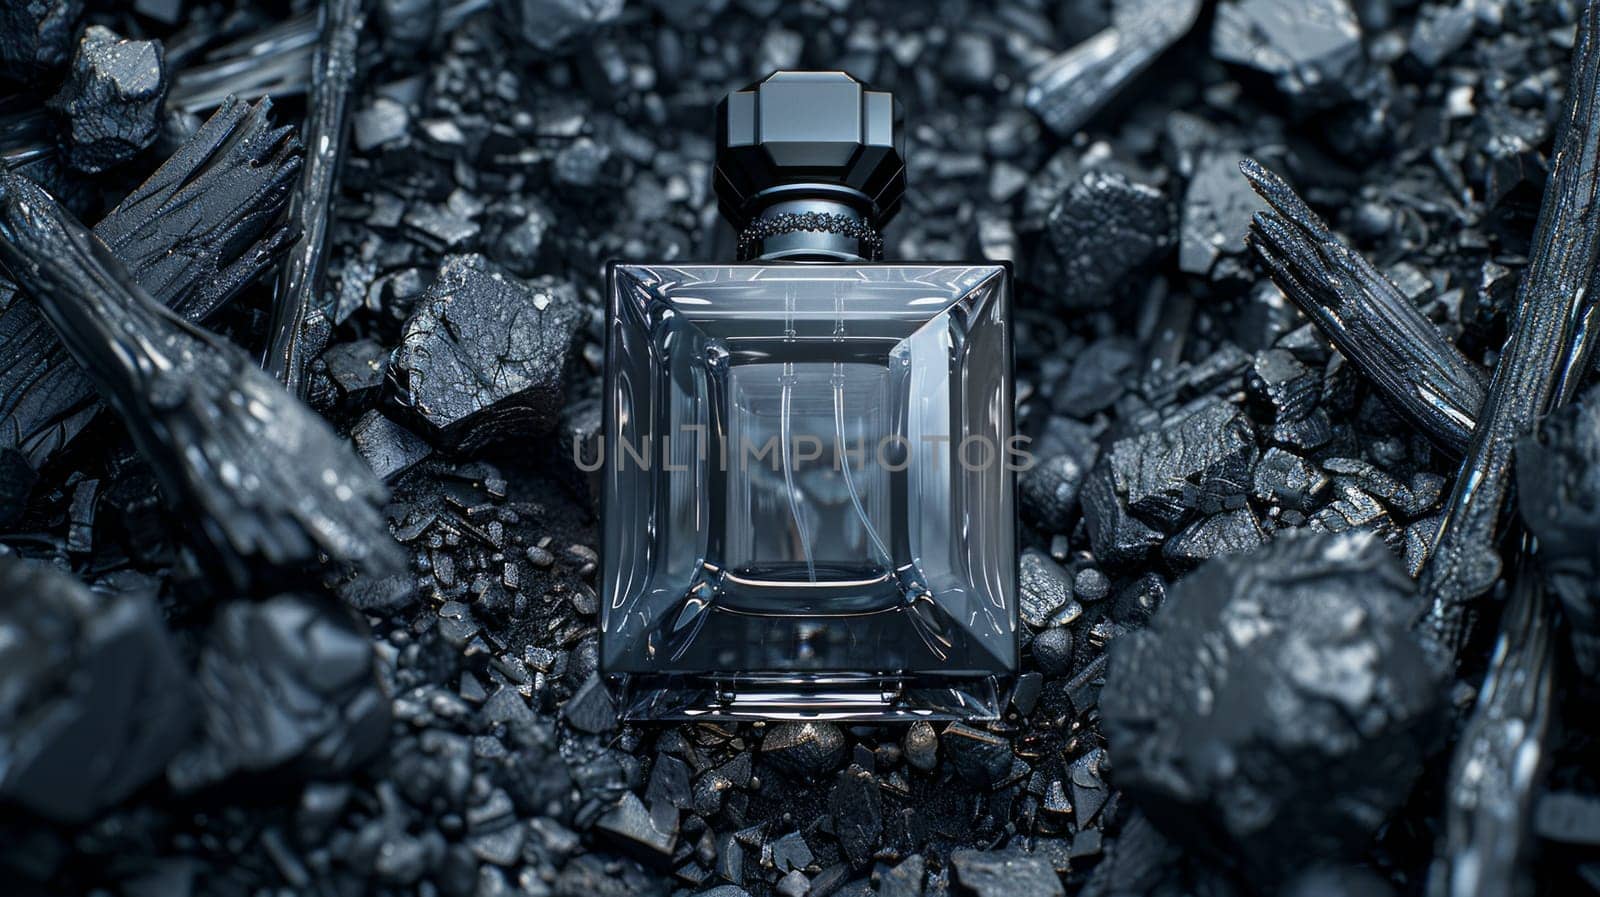 A bottle of perfume delicately rests atop a mound of rugged rocks, creating a striking contrast between elegance and raw nature.